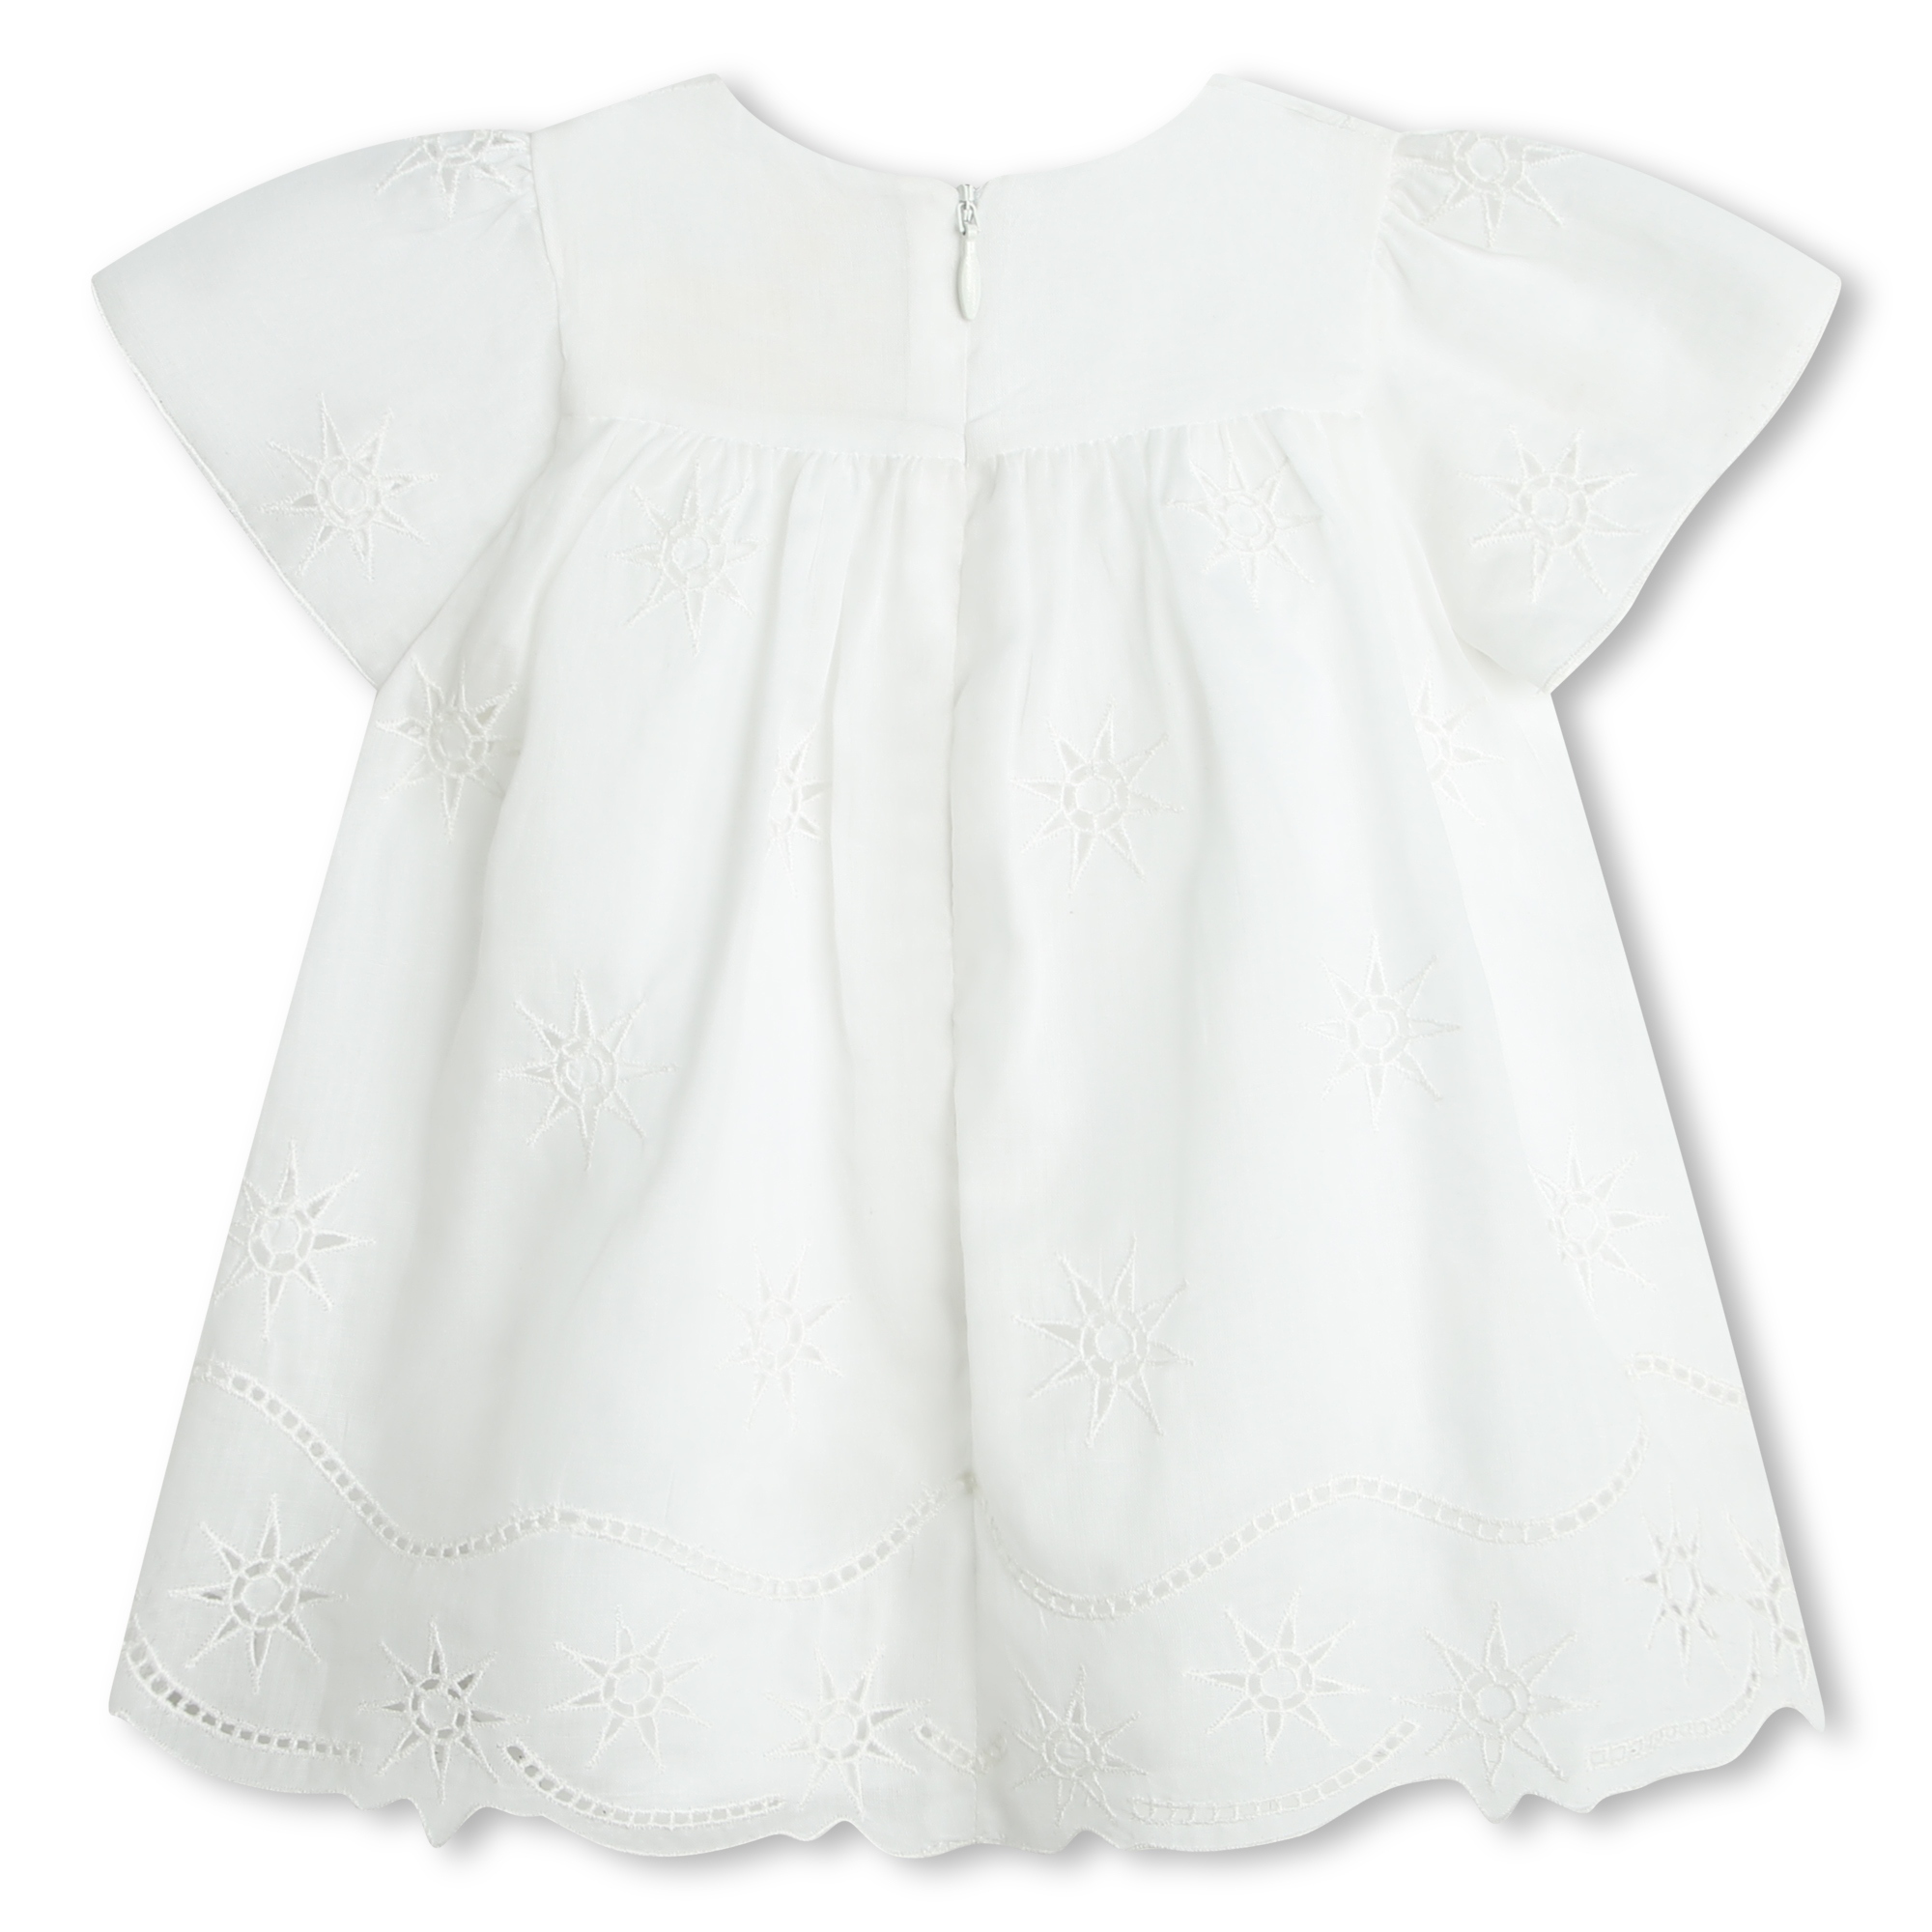 Matching dress and bloomer set CHLOE for GIRL